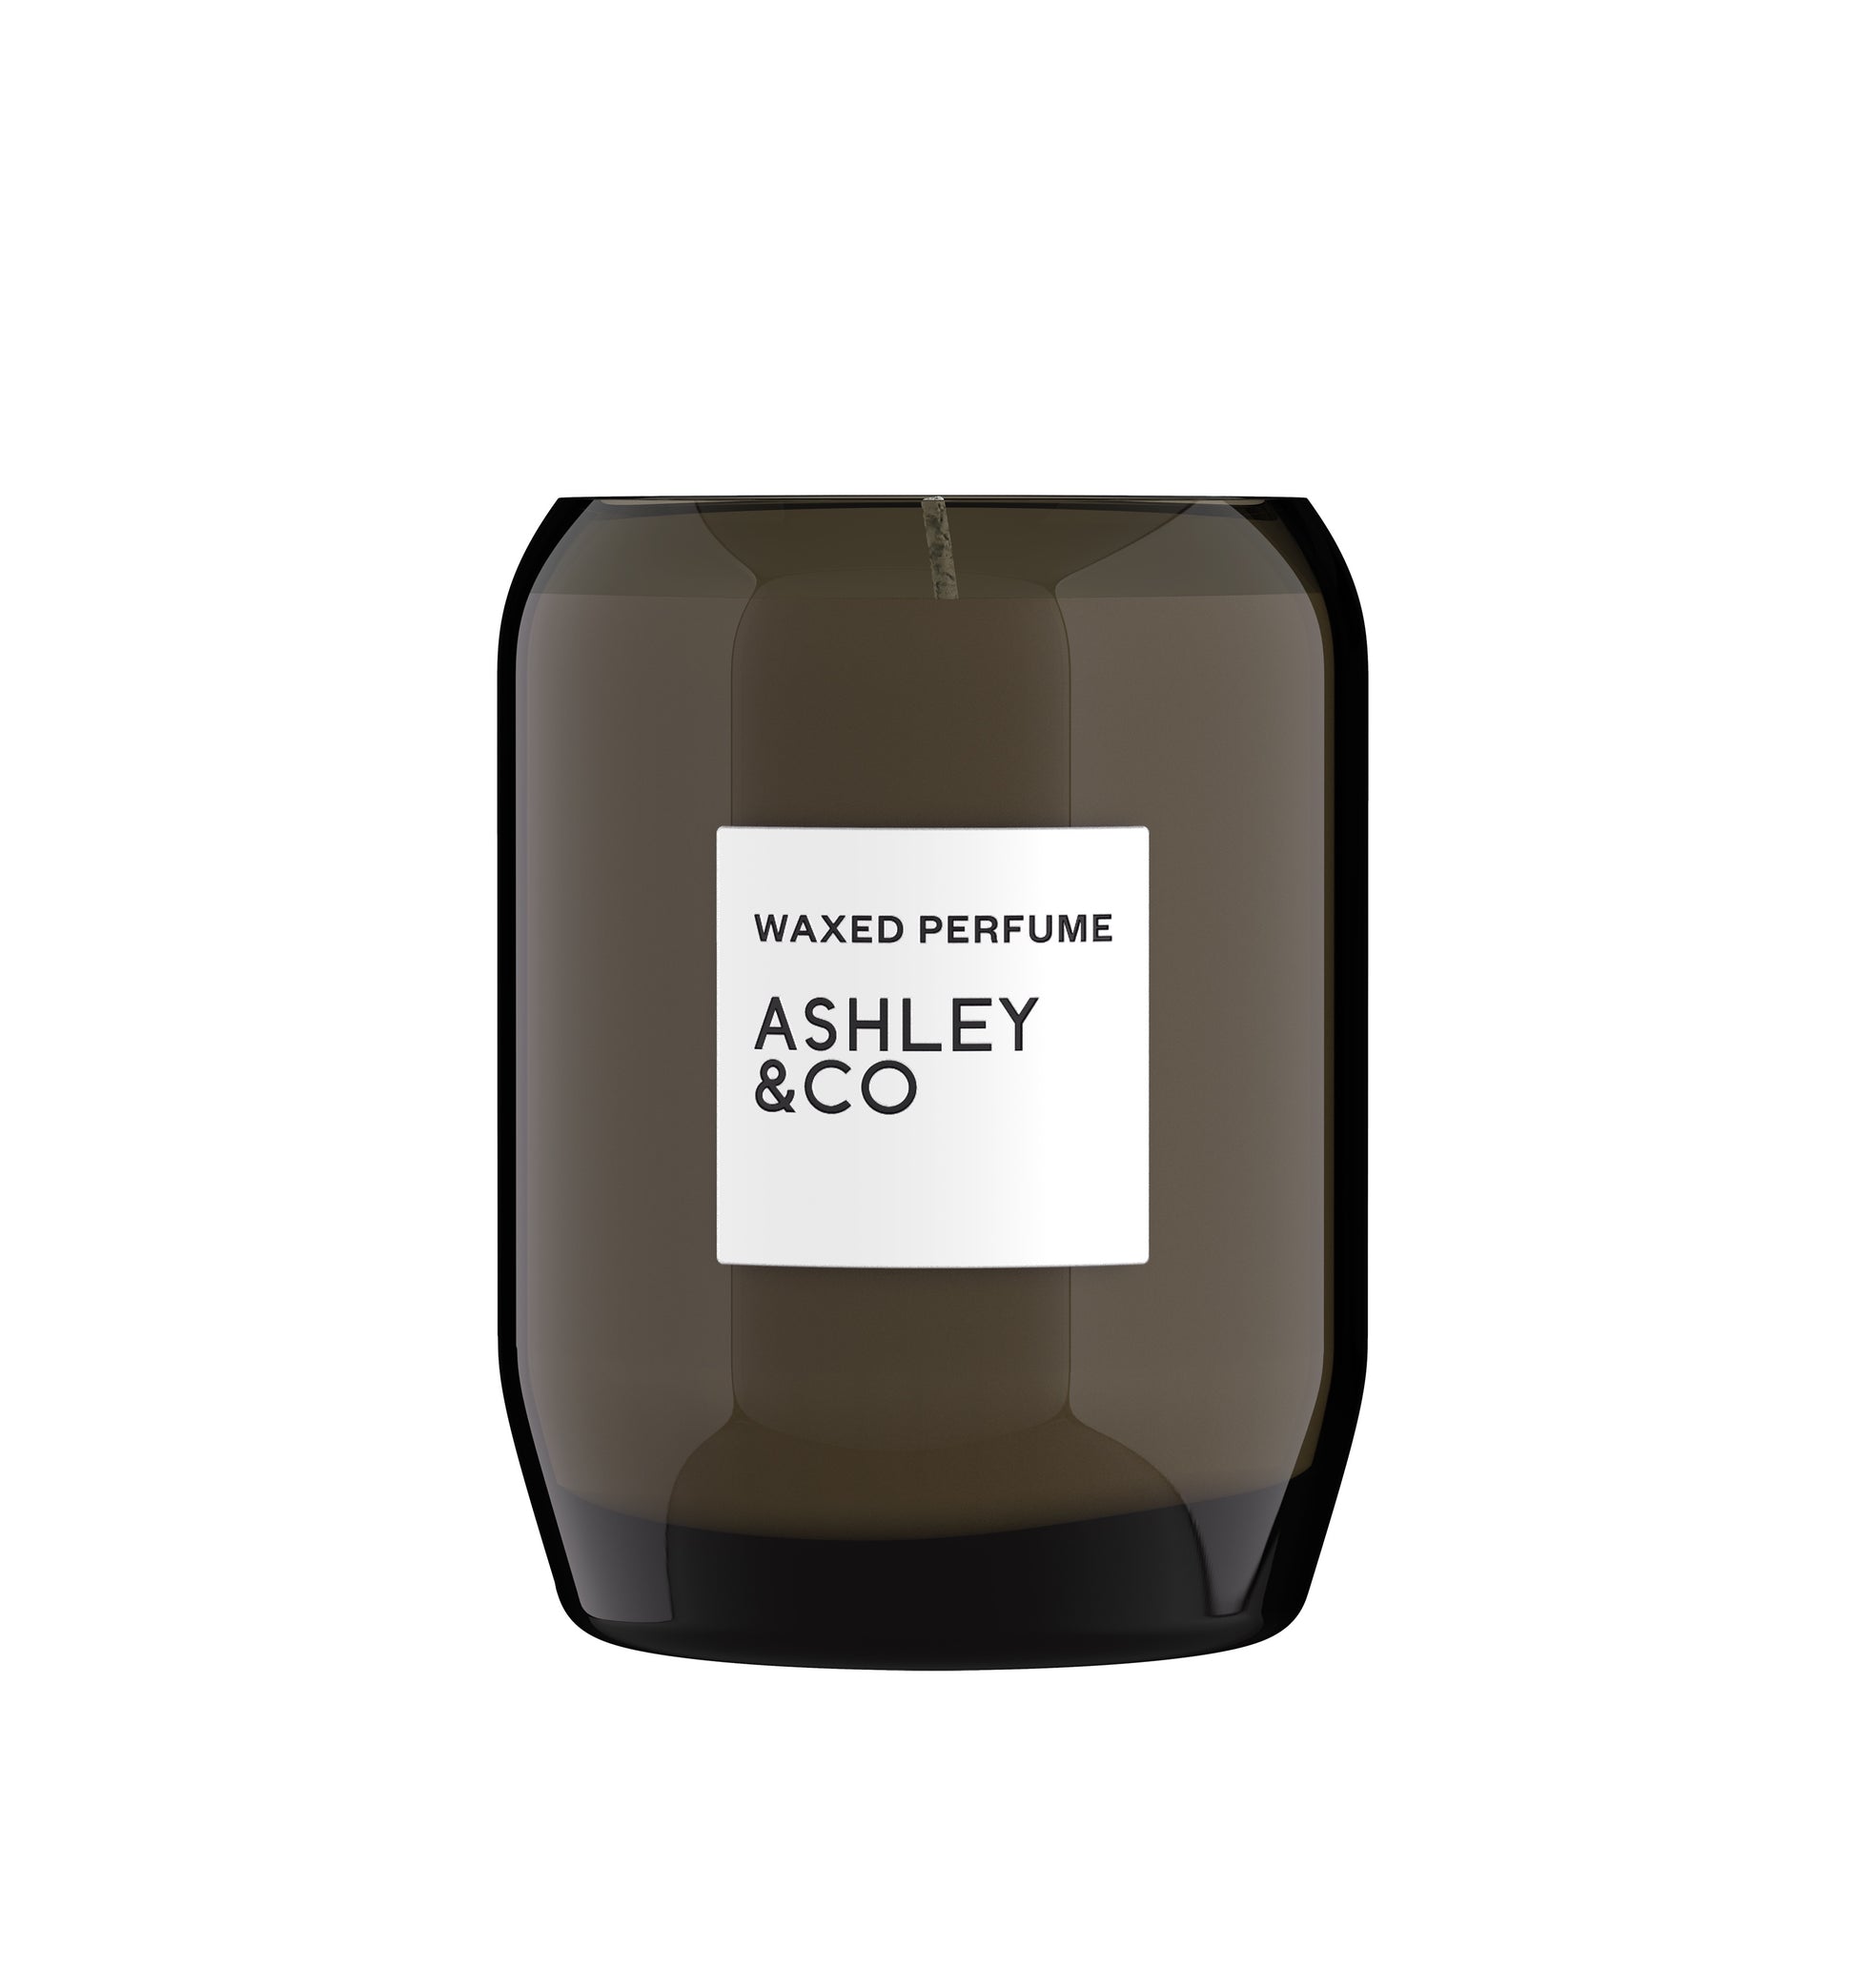 Ashley & Co's waxed perfume is as it sounds; 100% natural wax mixed with their signature scent.  This perfumed candle is crafted and poured by hand locally, here in New Zealand. ​​​​​​​ This earthy scent has notes of amber, vanilla and sandalwood to create a feeling of warmth and security.  Scent:  Vine & Paisley  Size:  207g  Burn time:  40-45 hours